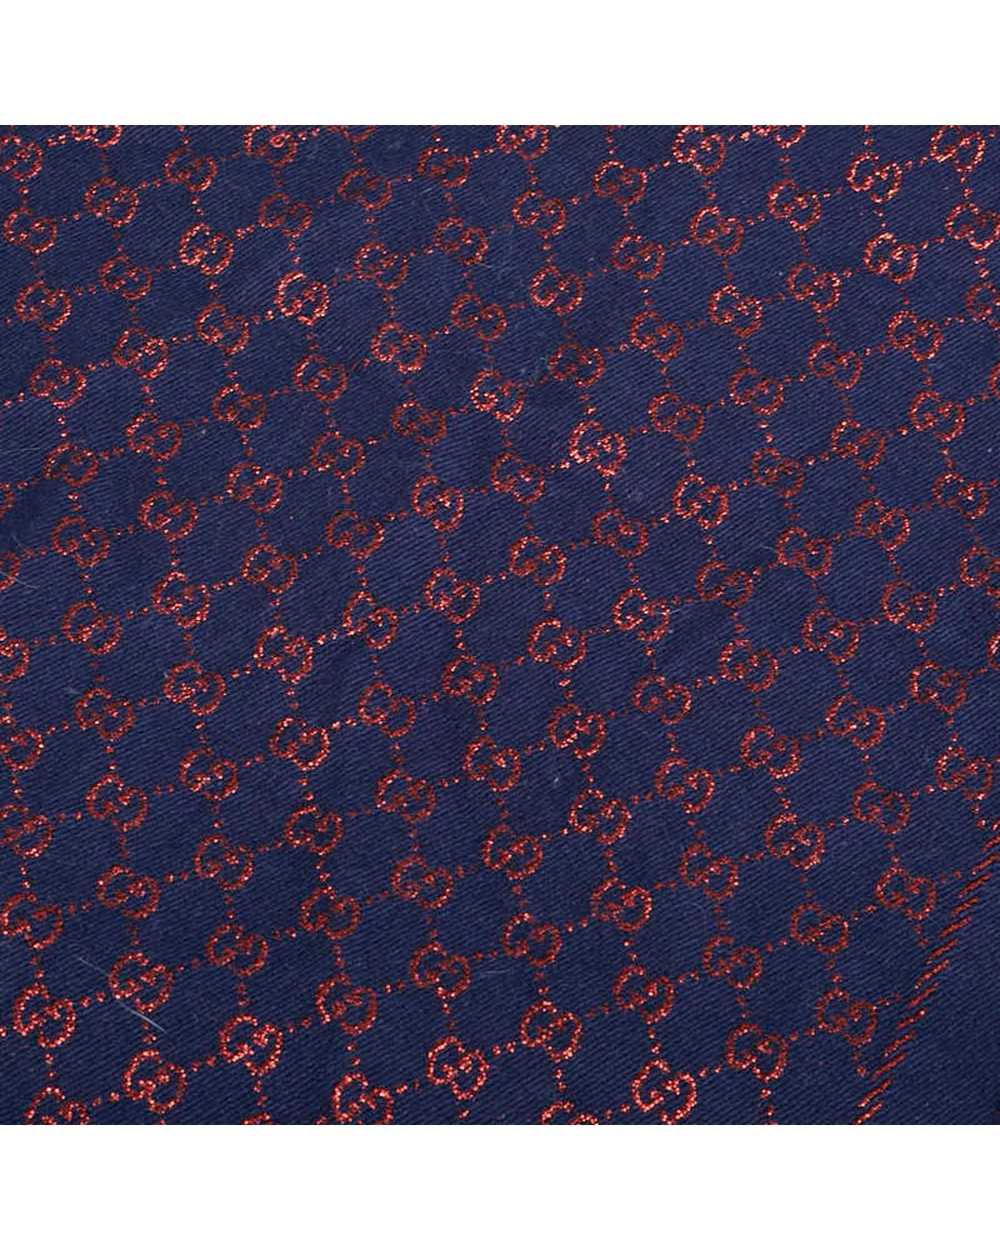 Gucci Navy and Red Wool-Silk Stole - image 2